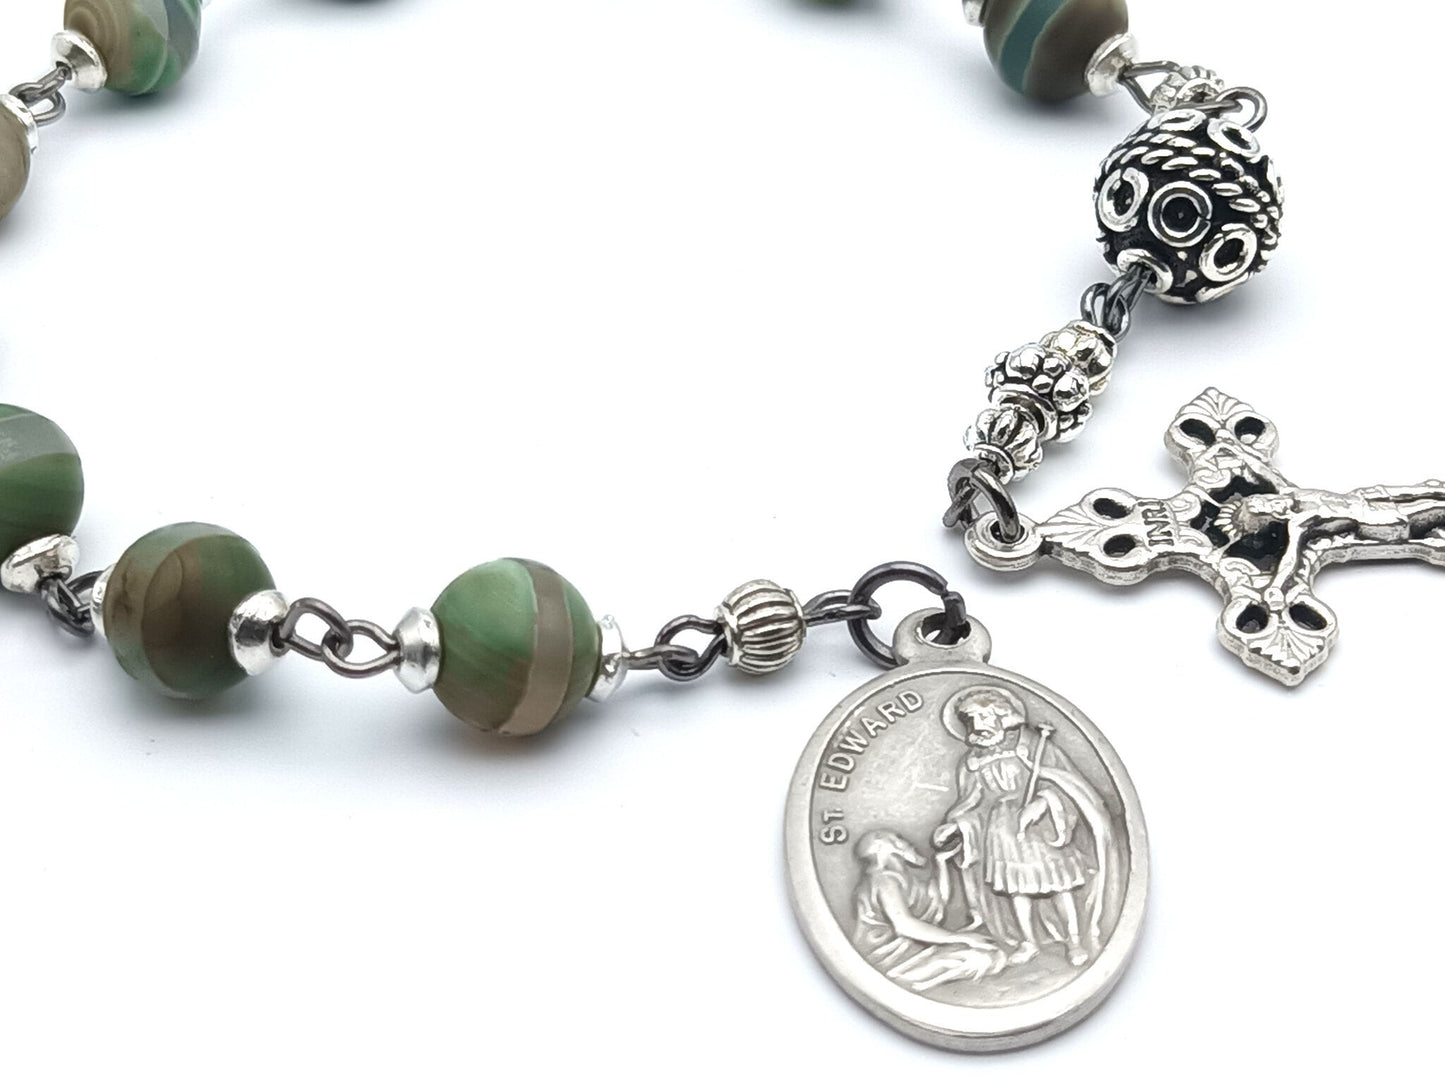 Saint Edward unique rosary beads single decade or tenner rosary with green agate gemstone beads, silver pater bead, crucifix and Saint Edward medal.